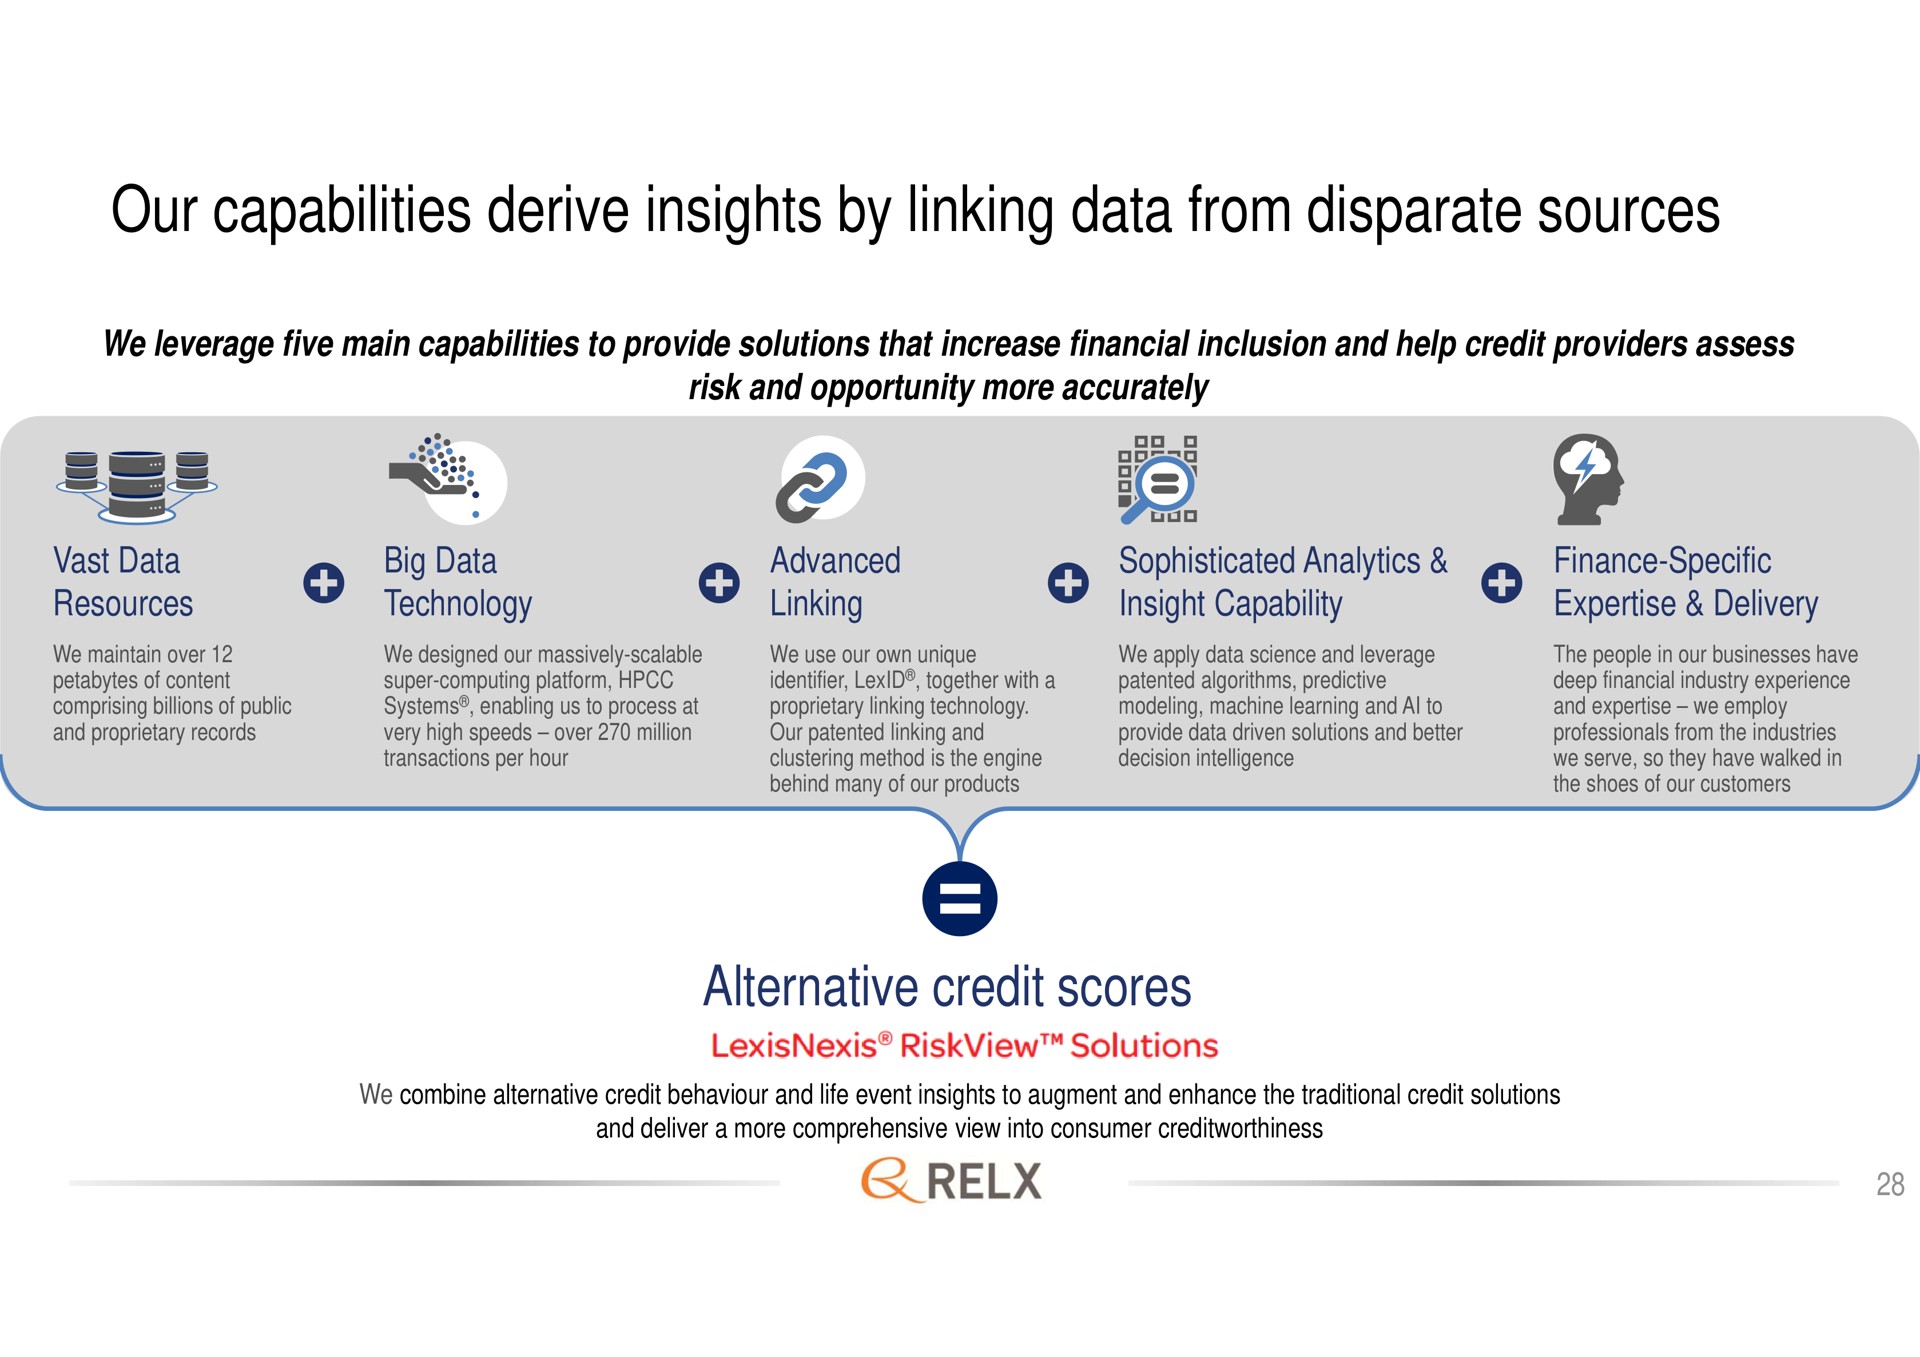 our capabilities derive insights by linking data from disparate sources alternative credit scores a | RELX